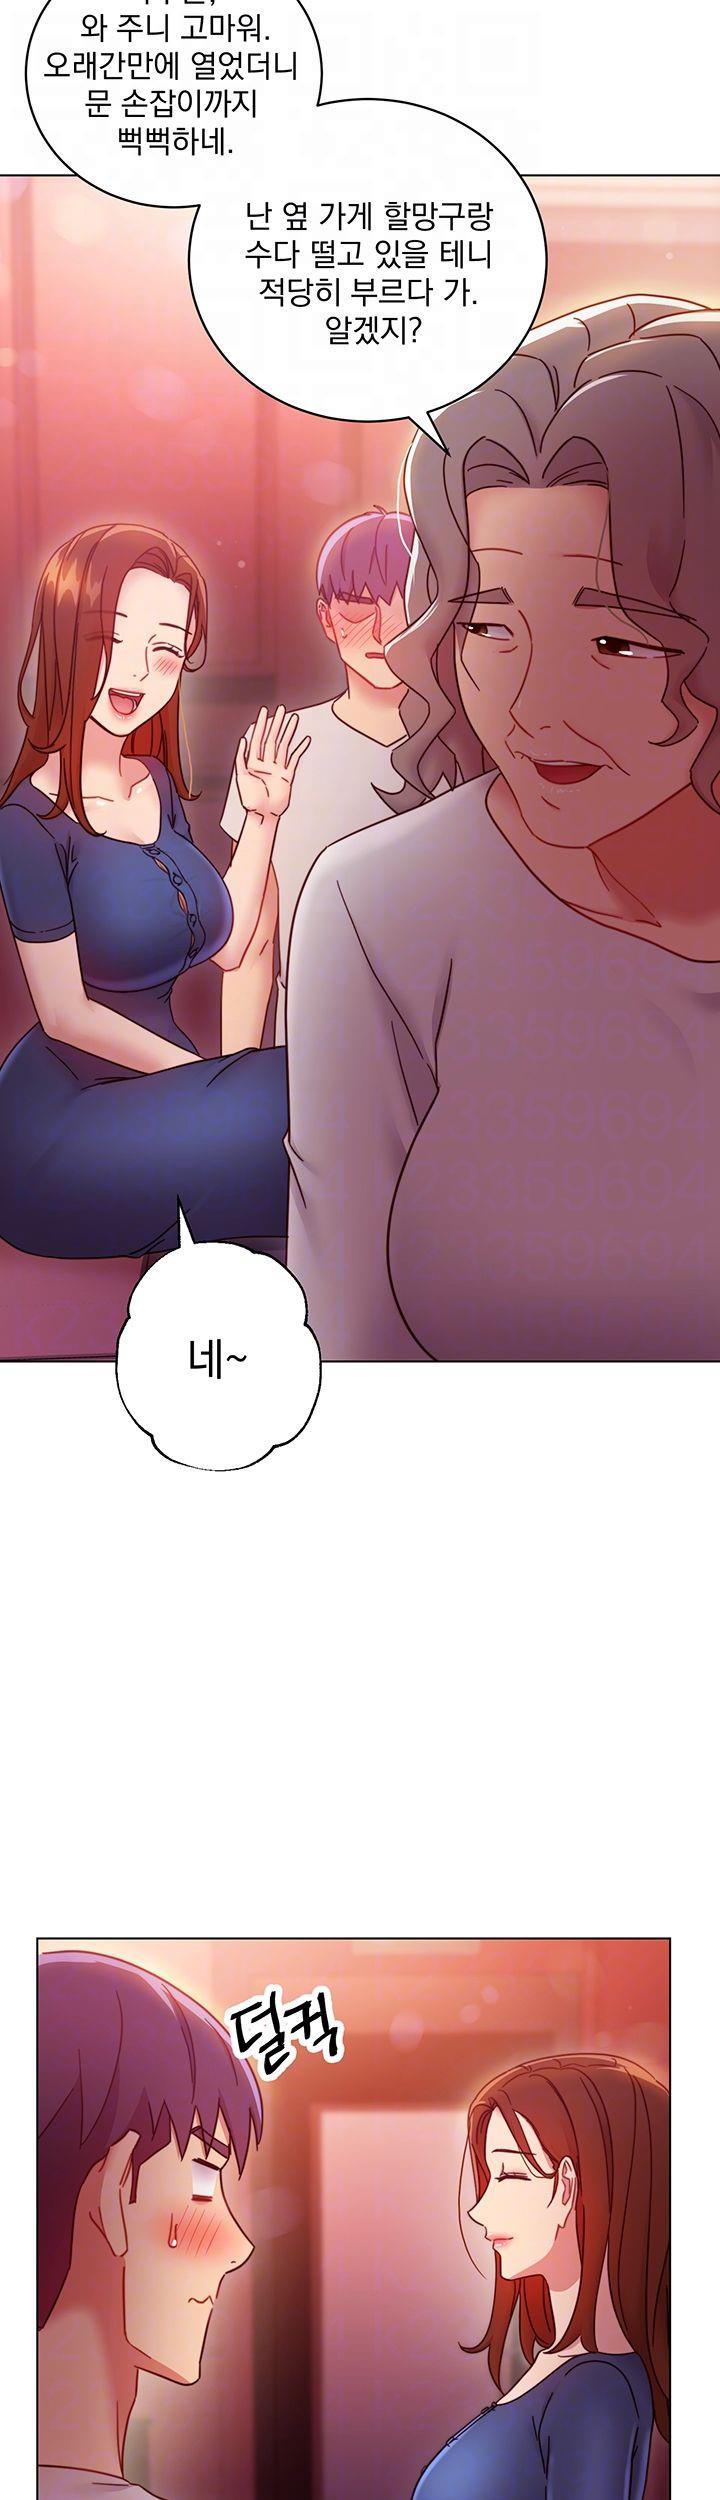 Stepmother s past. My stepmother friends манхва. Stepmother friends Raw Chapter 10. Stepmother friends. Stepmother friends manhwa 142 Raw.